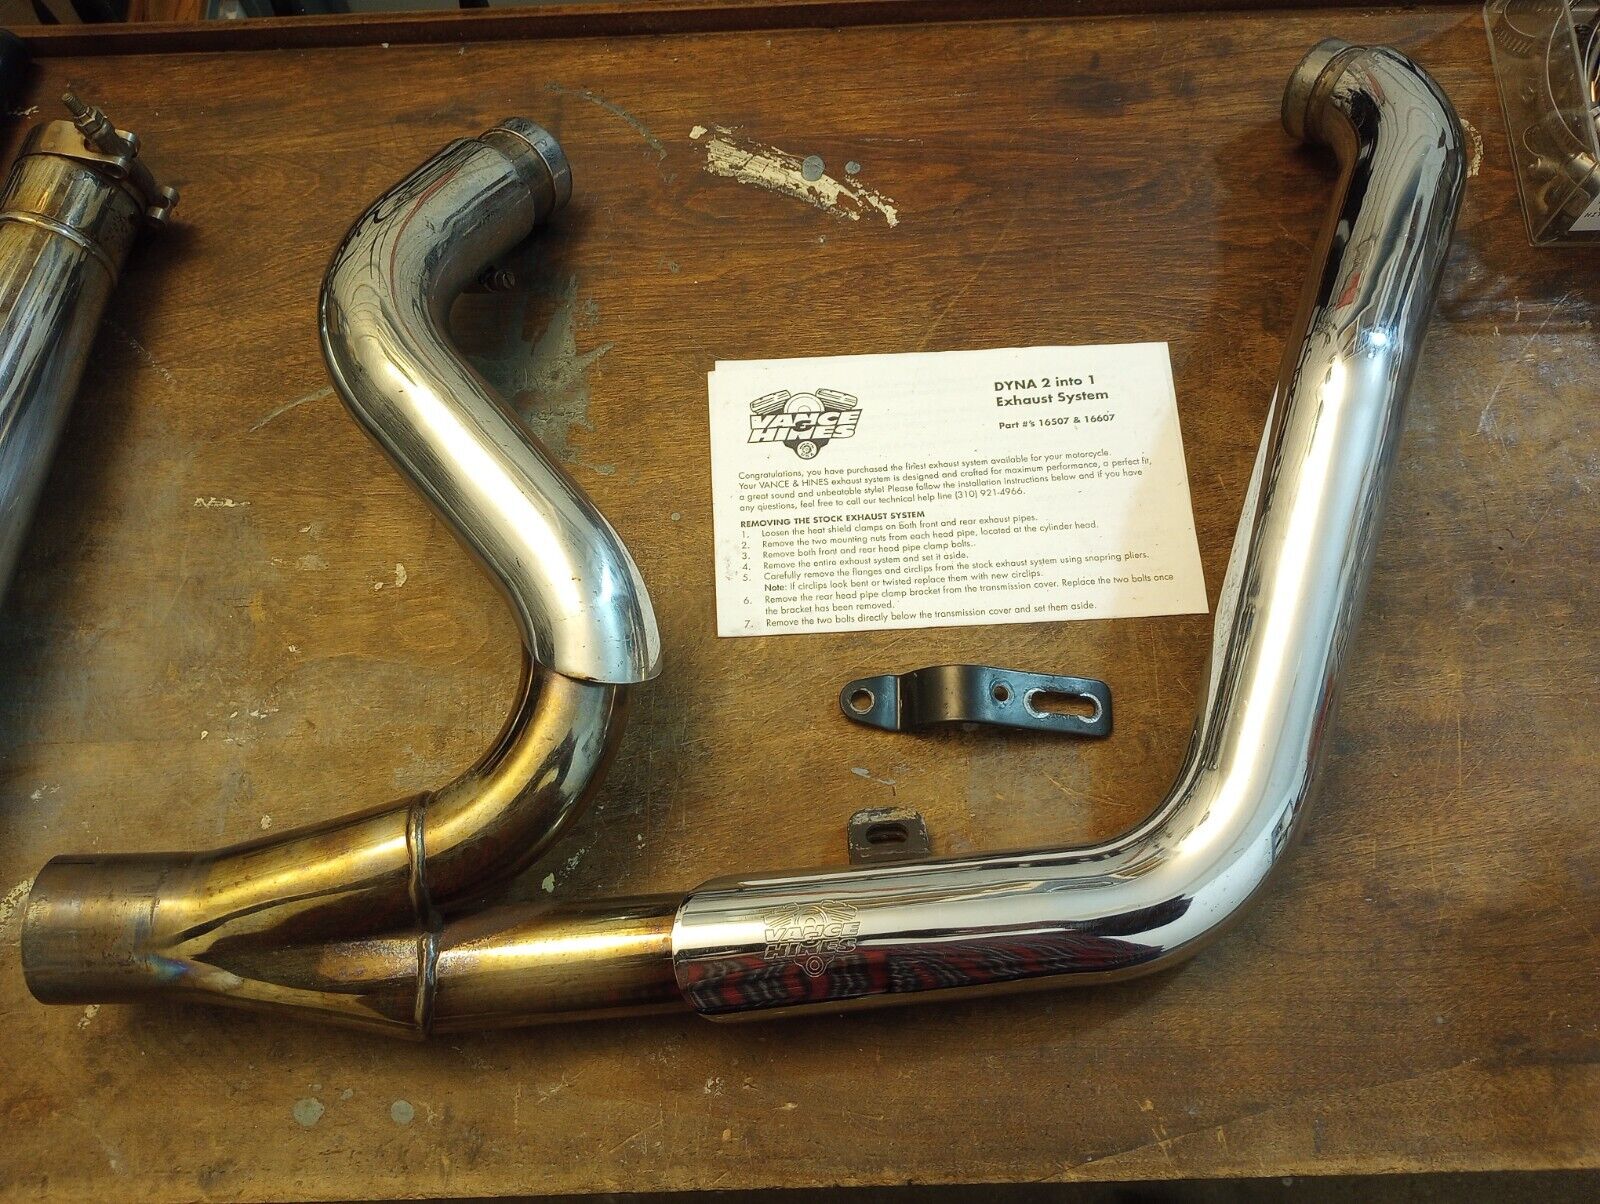 VANCE & HINES DYNA 2 INTO 1 EXHAUST SYSTEM PART # 16507 and 16607